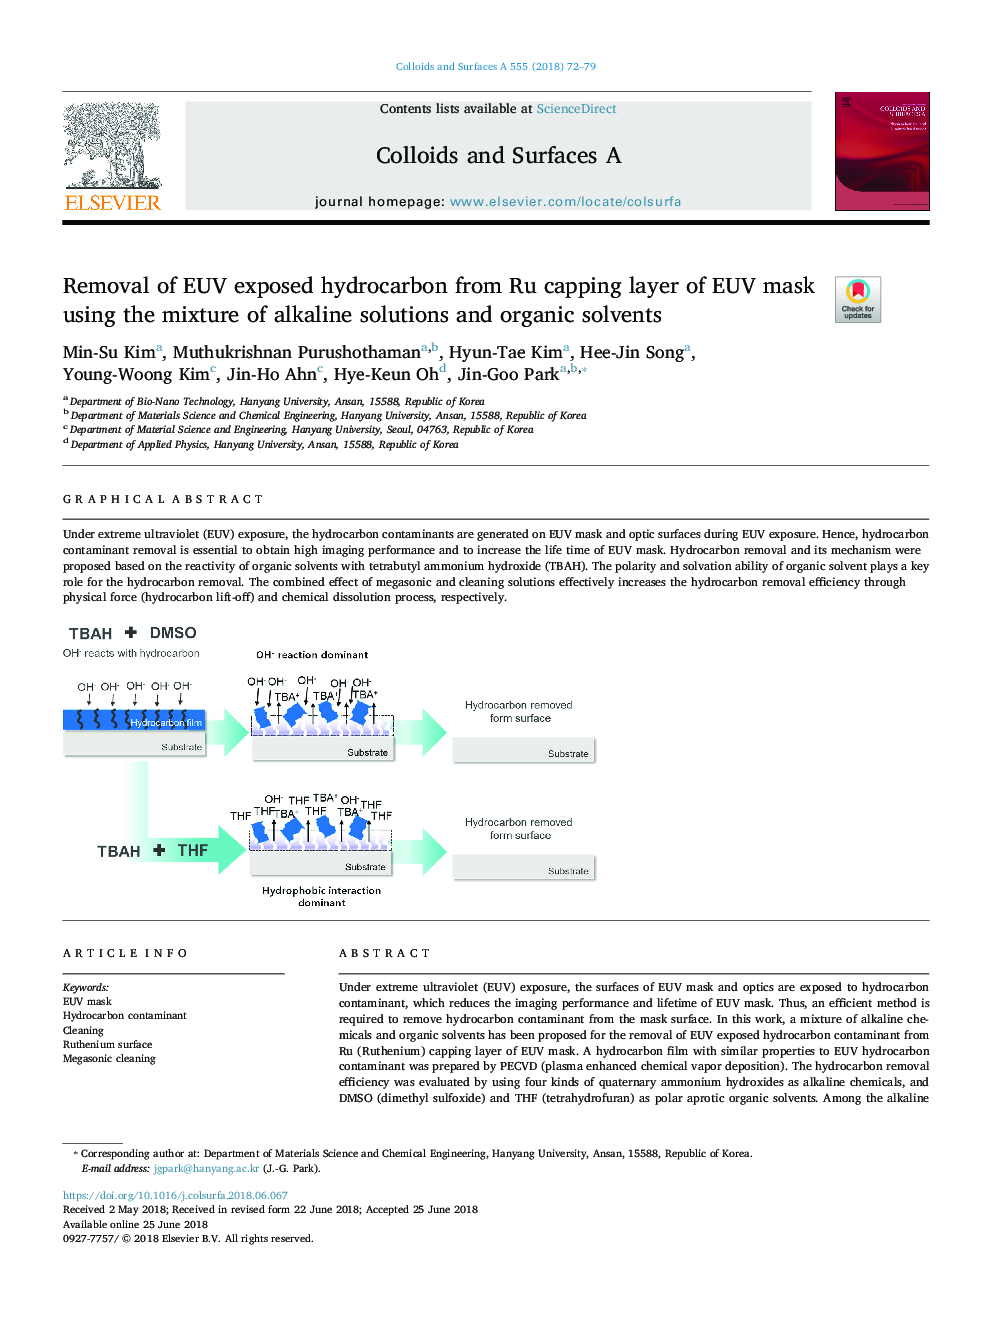 Removal of EUV exposed hydrocarbon from Ru capping layer of EUV mask using the mixture of alkaline solutions and organic solvents